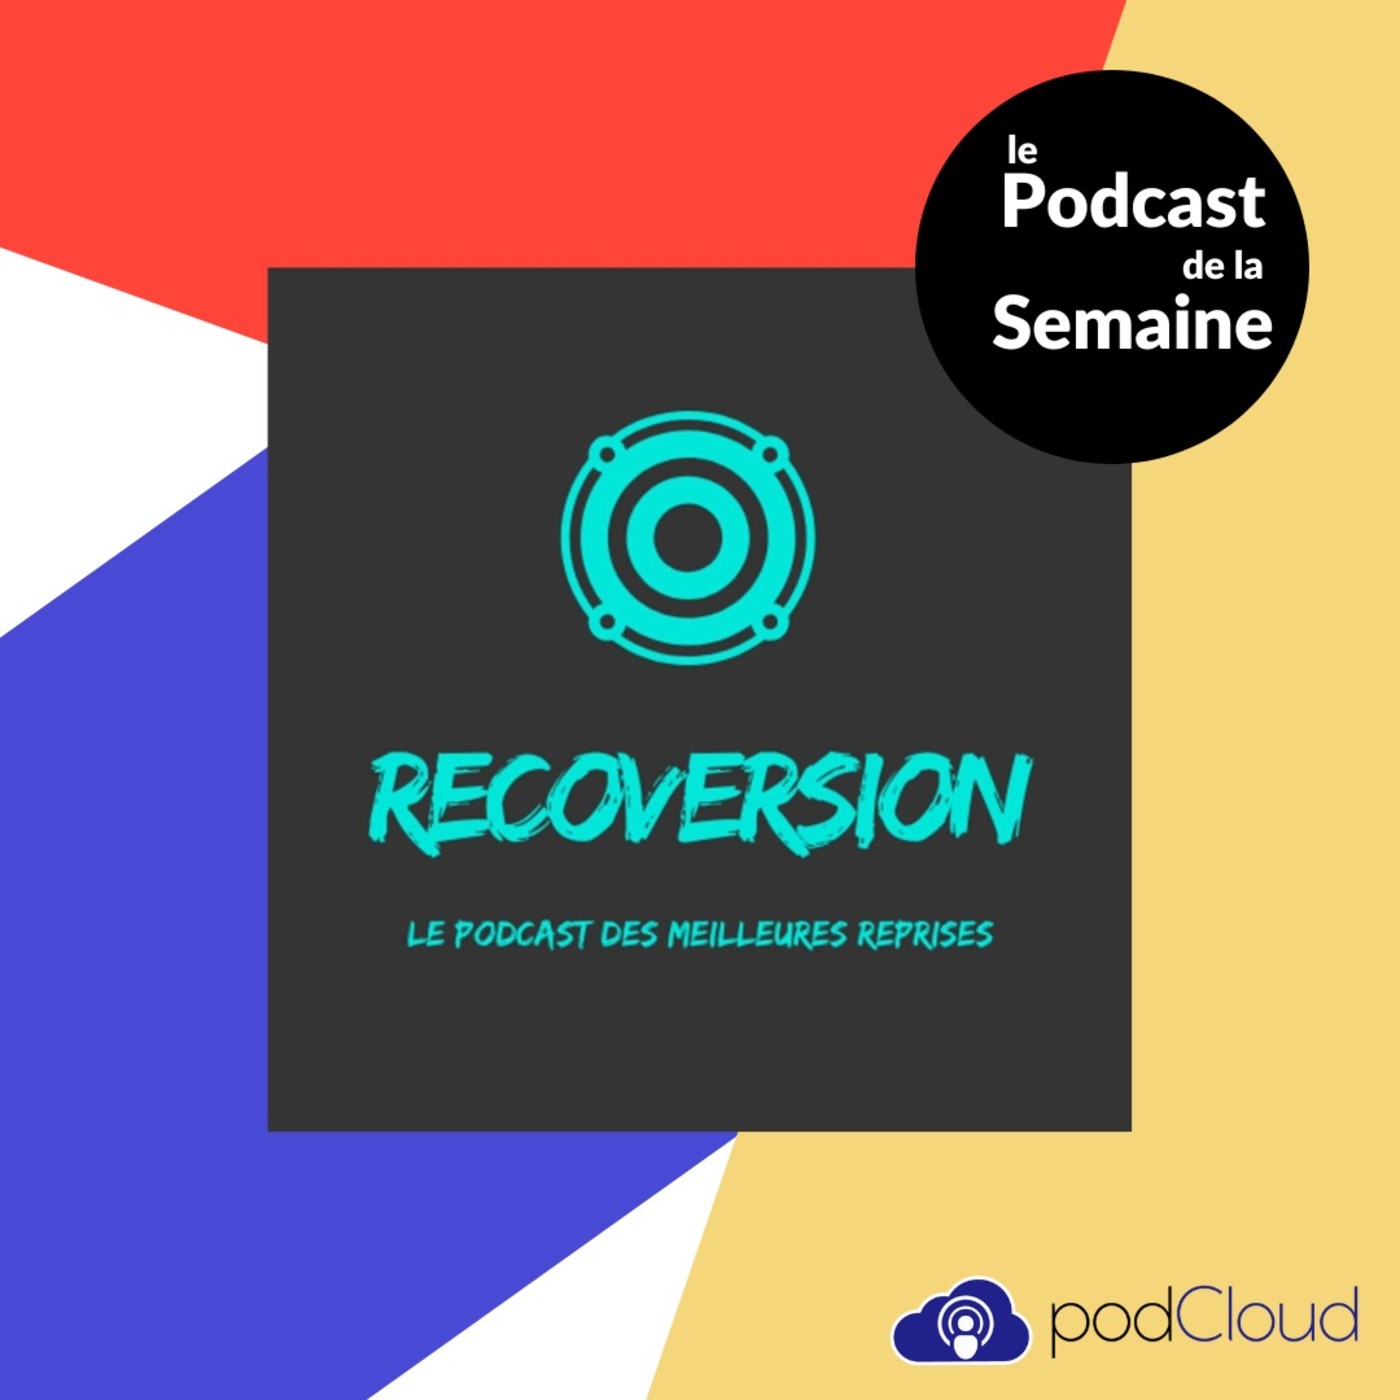 Recoversion